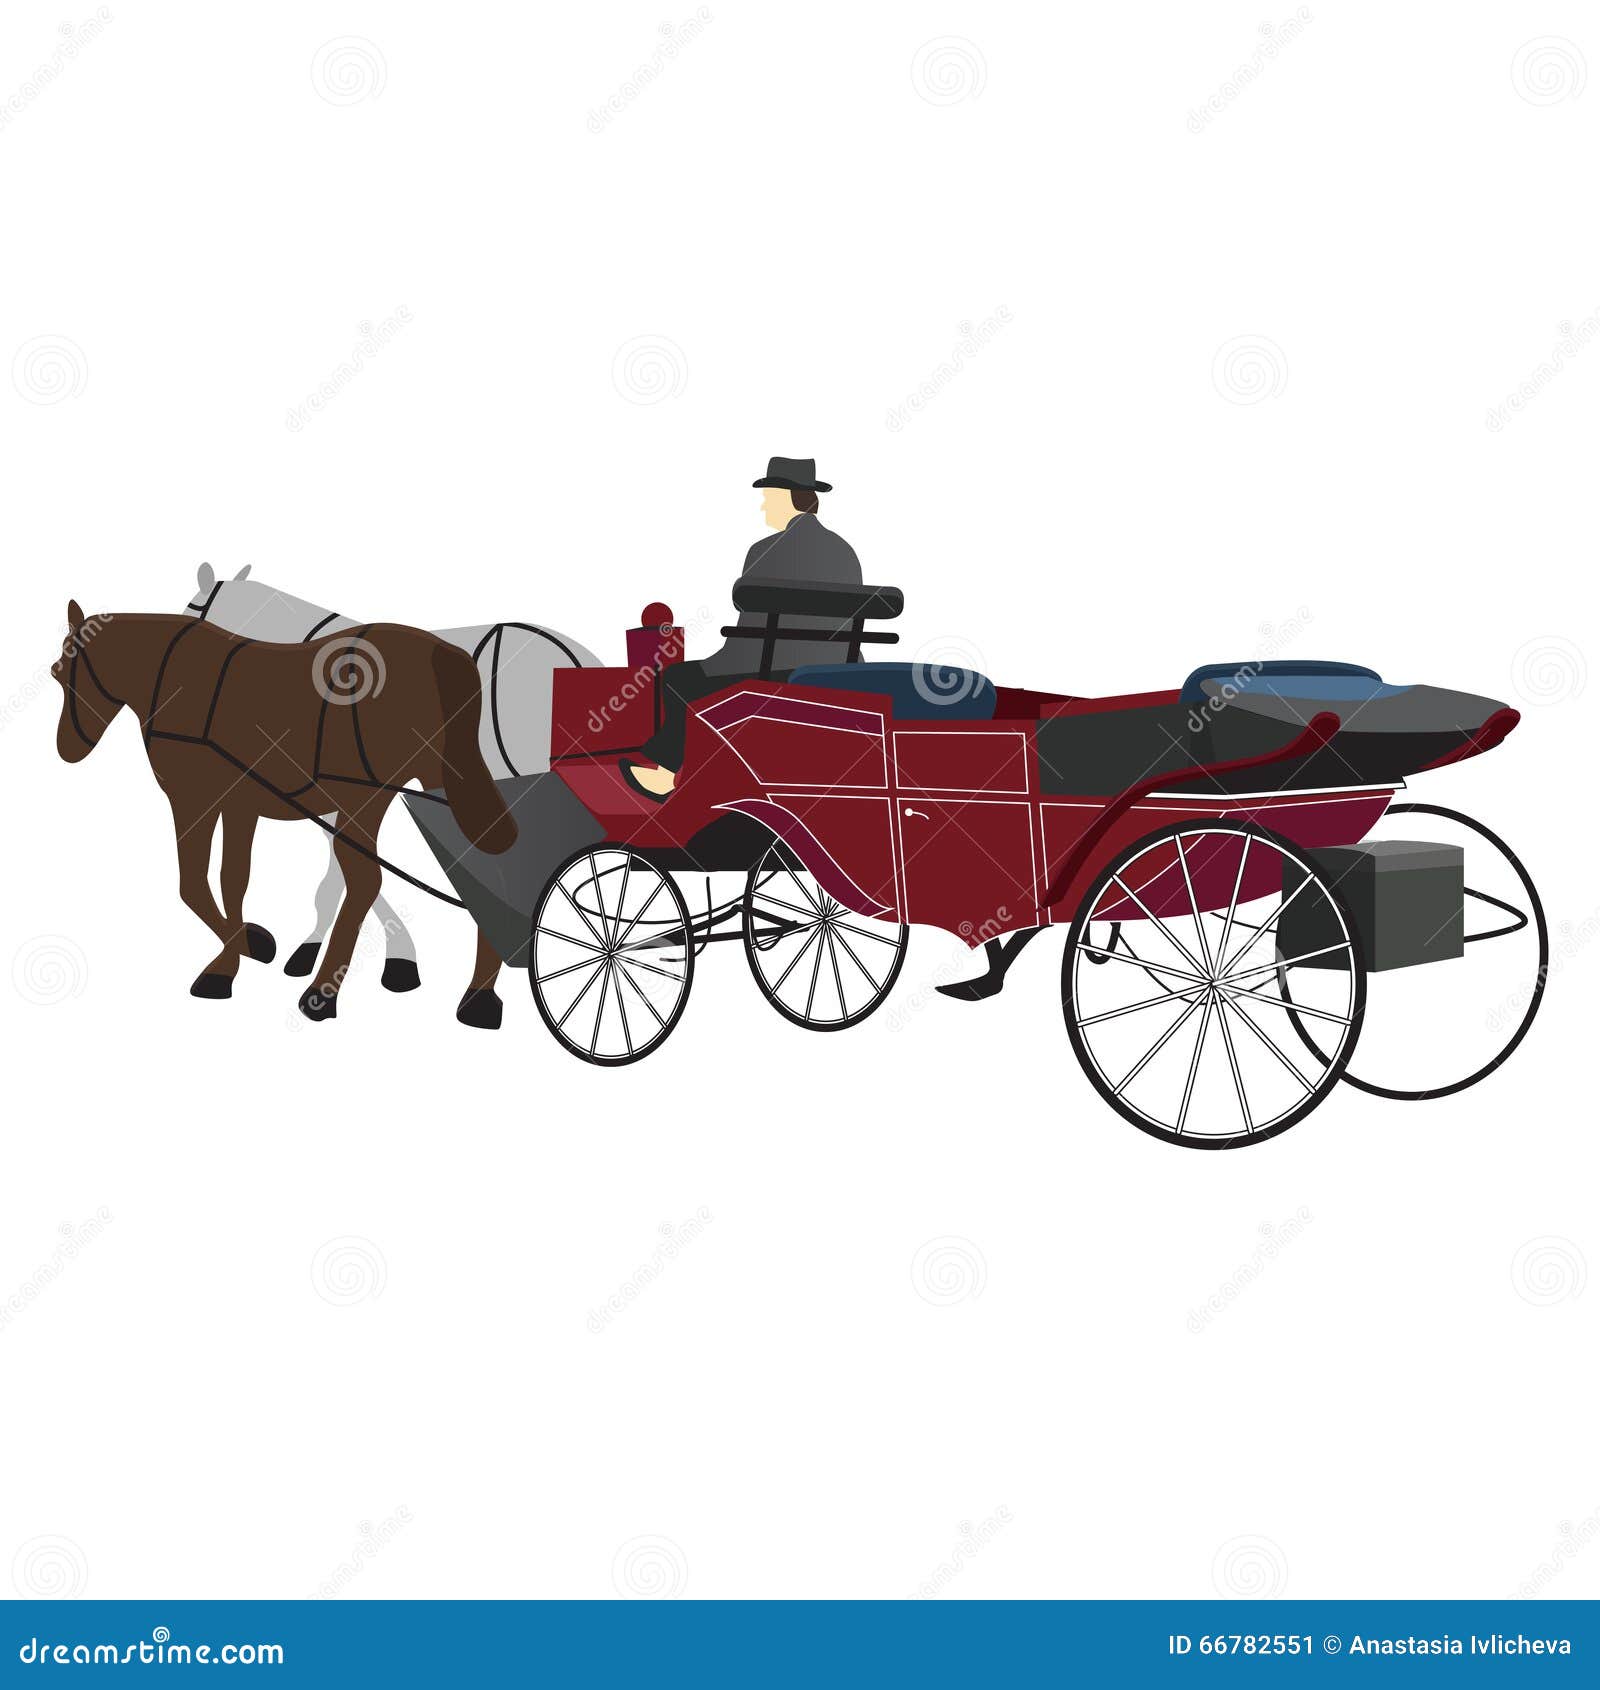 horse driving clipart - photo #16